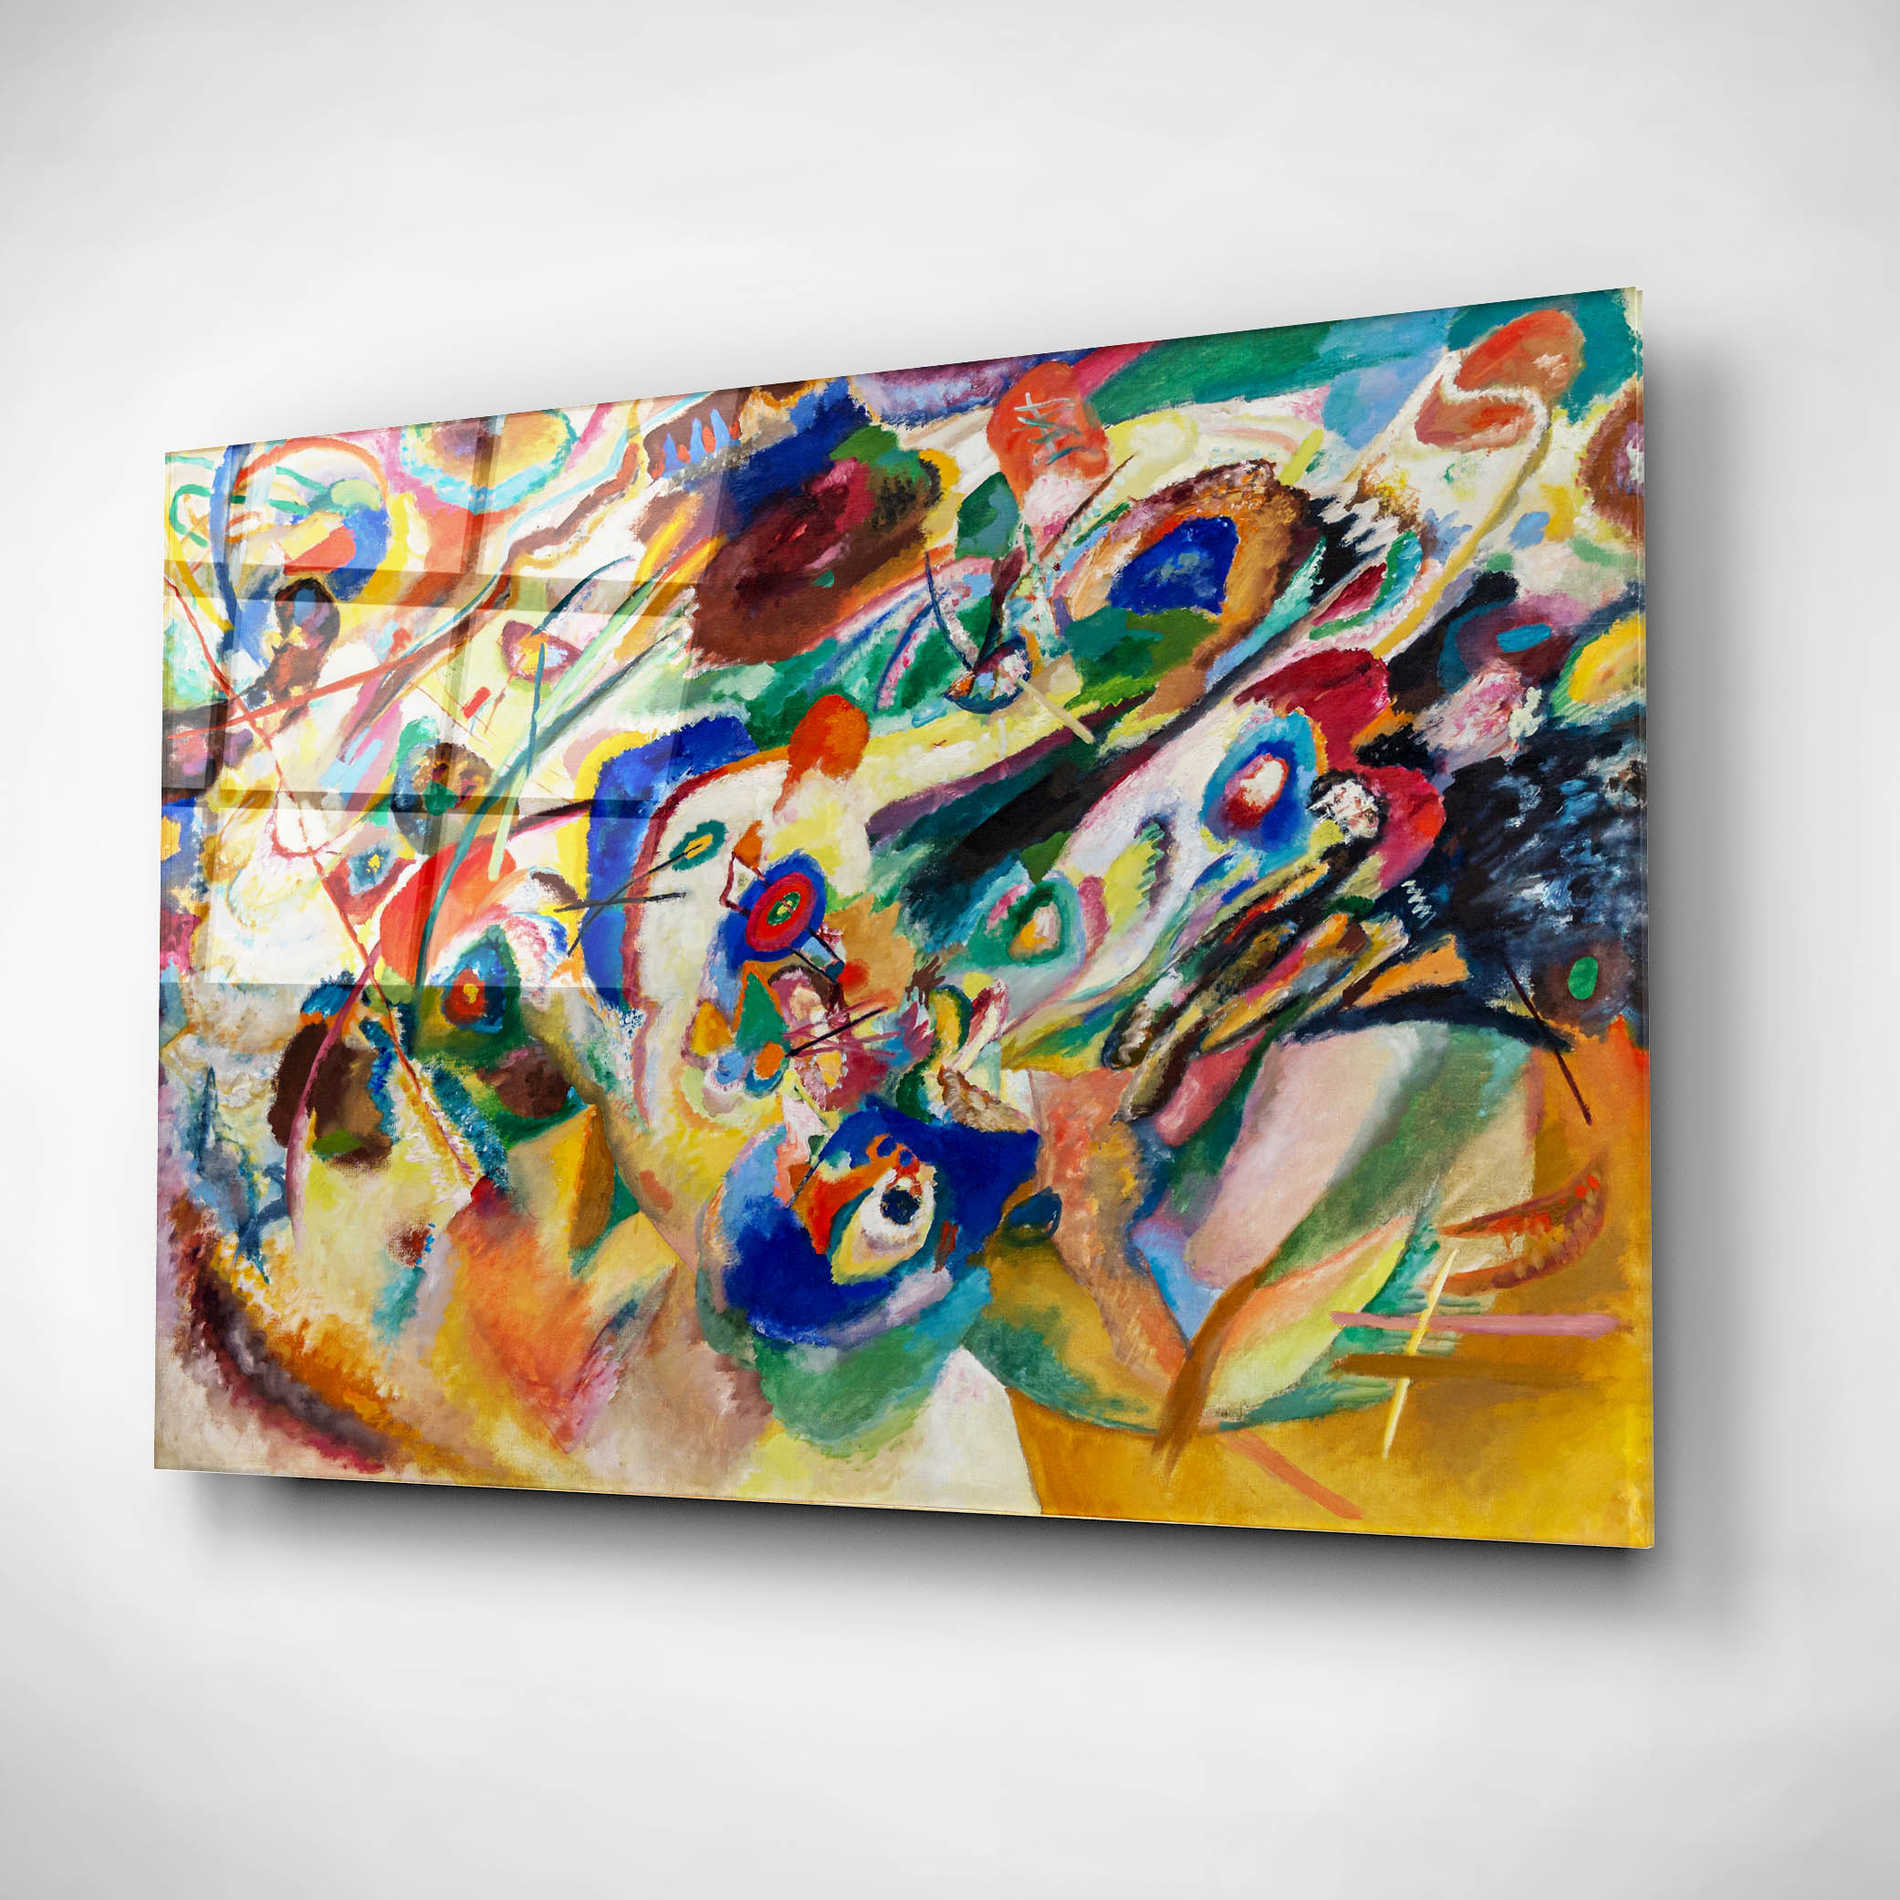 Epic Art 'Sketch 2 for Composition VII' by Wassily Kandinsky, Acrylic Glass Wall Art,16x12